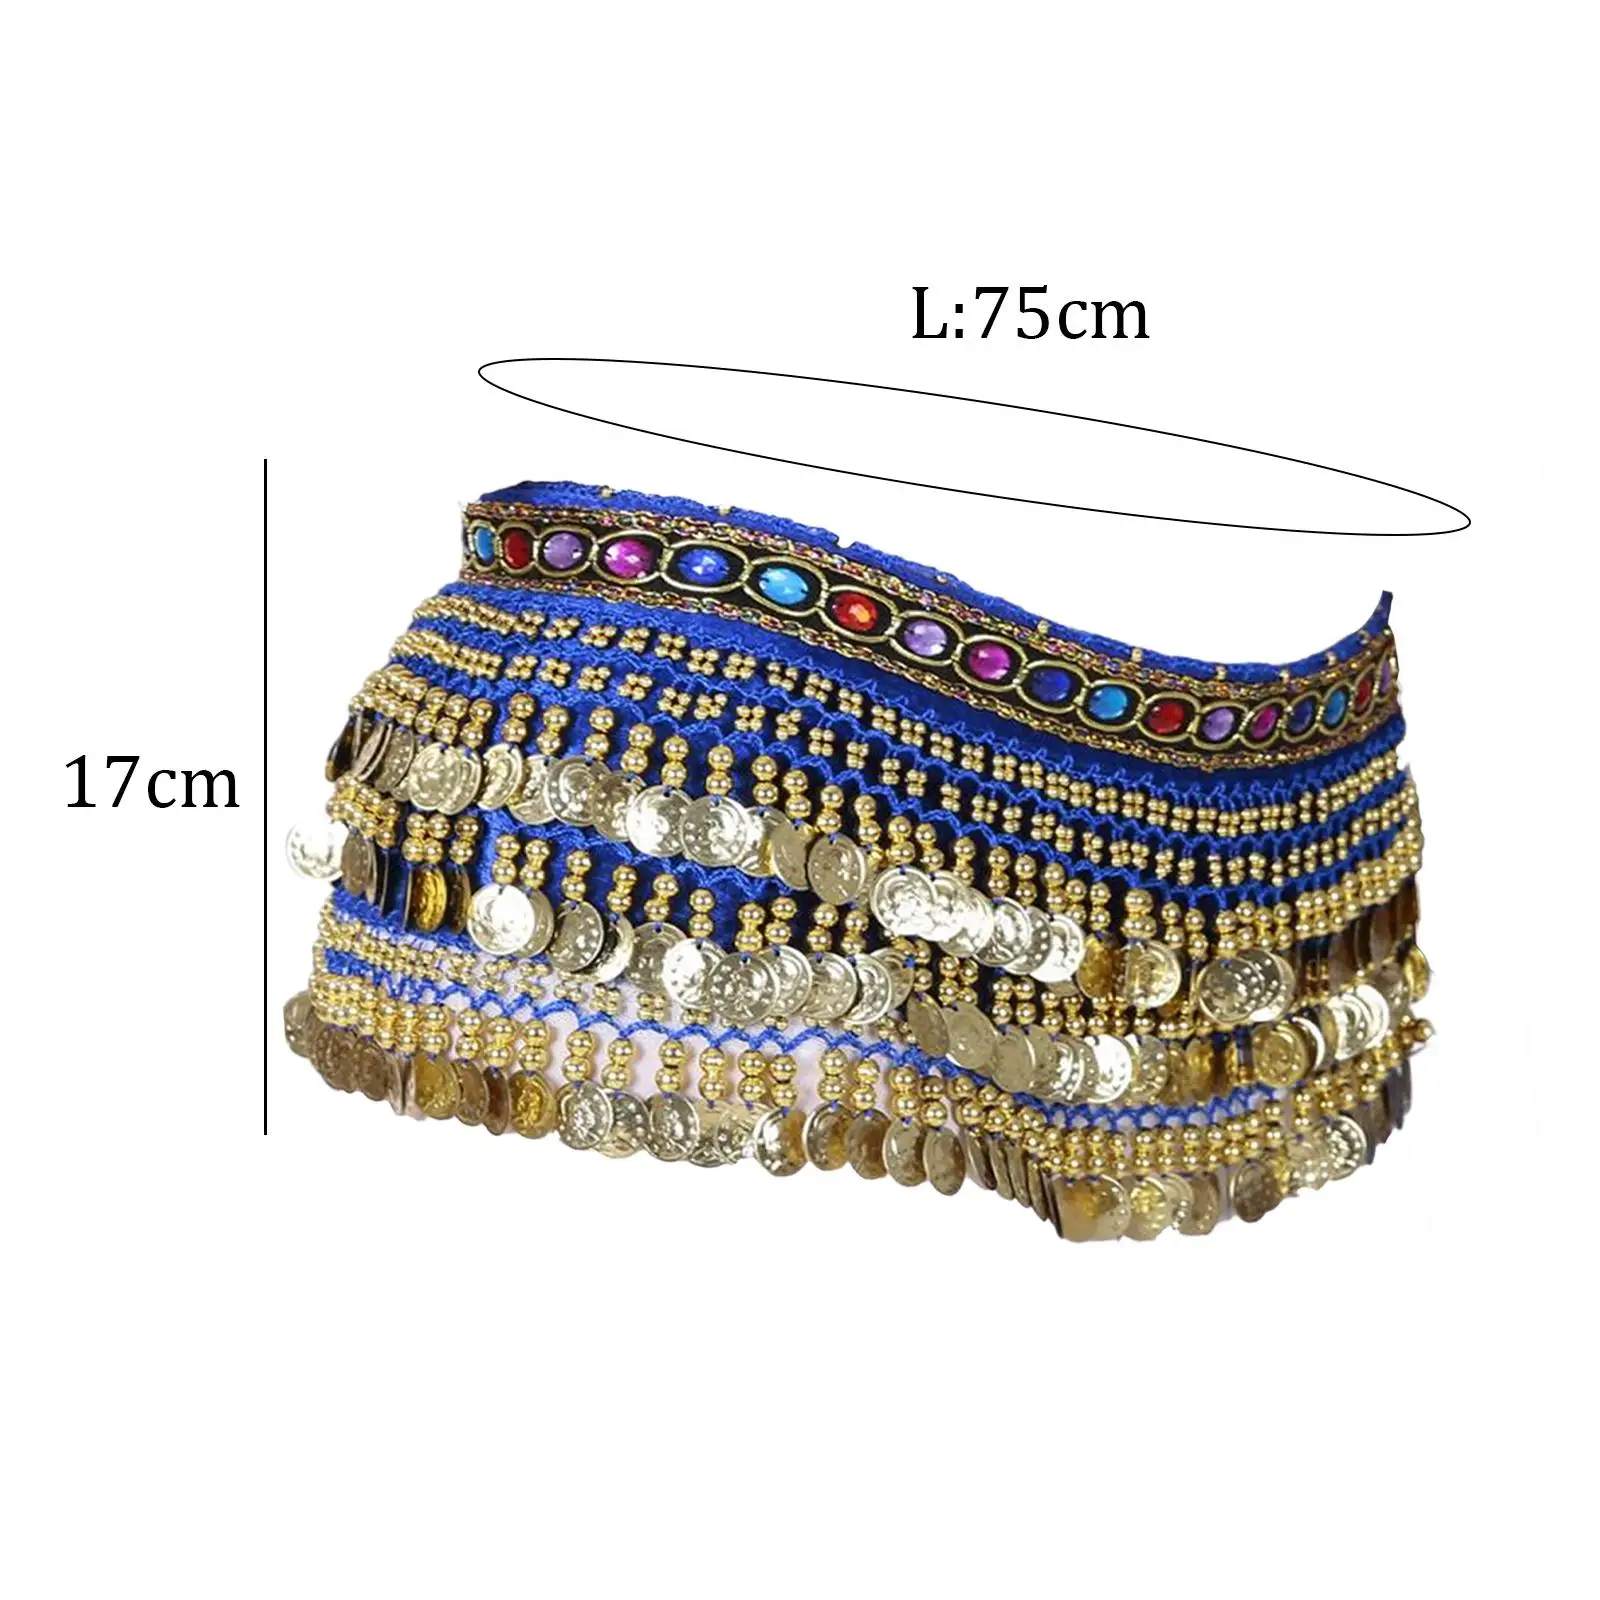 Belly Dance Hip Scarf Wrap Costume Sparkly Clothes Outfit Shiny Dress Hip Belt for Club Festival Dancer Performance Carnival